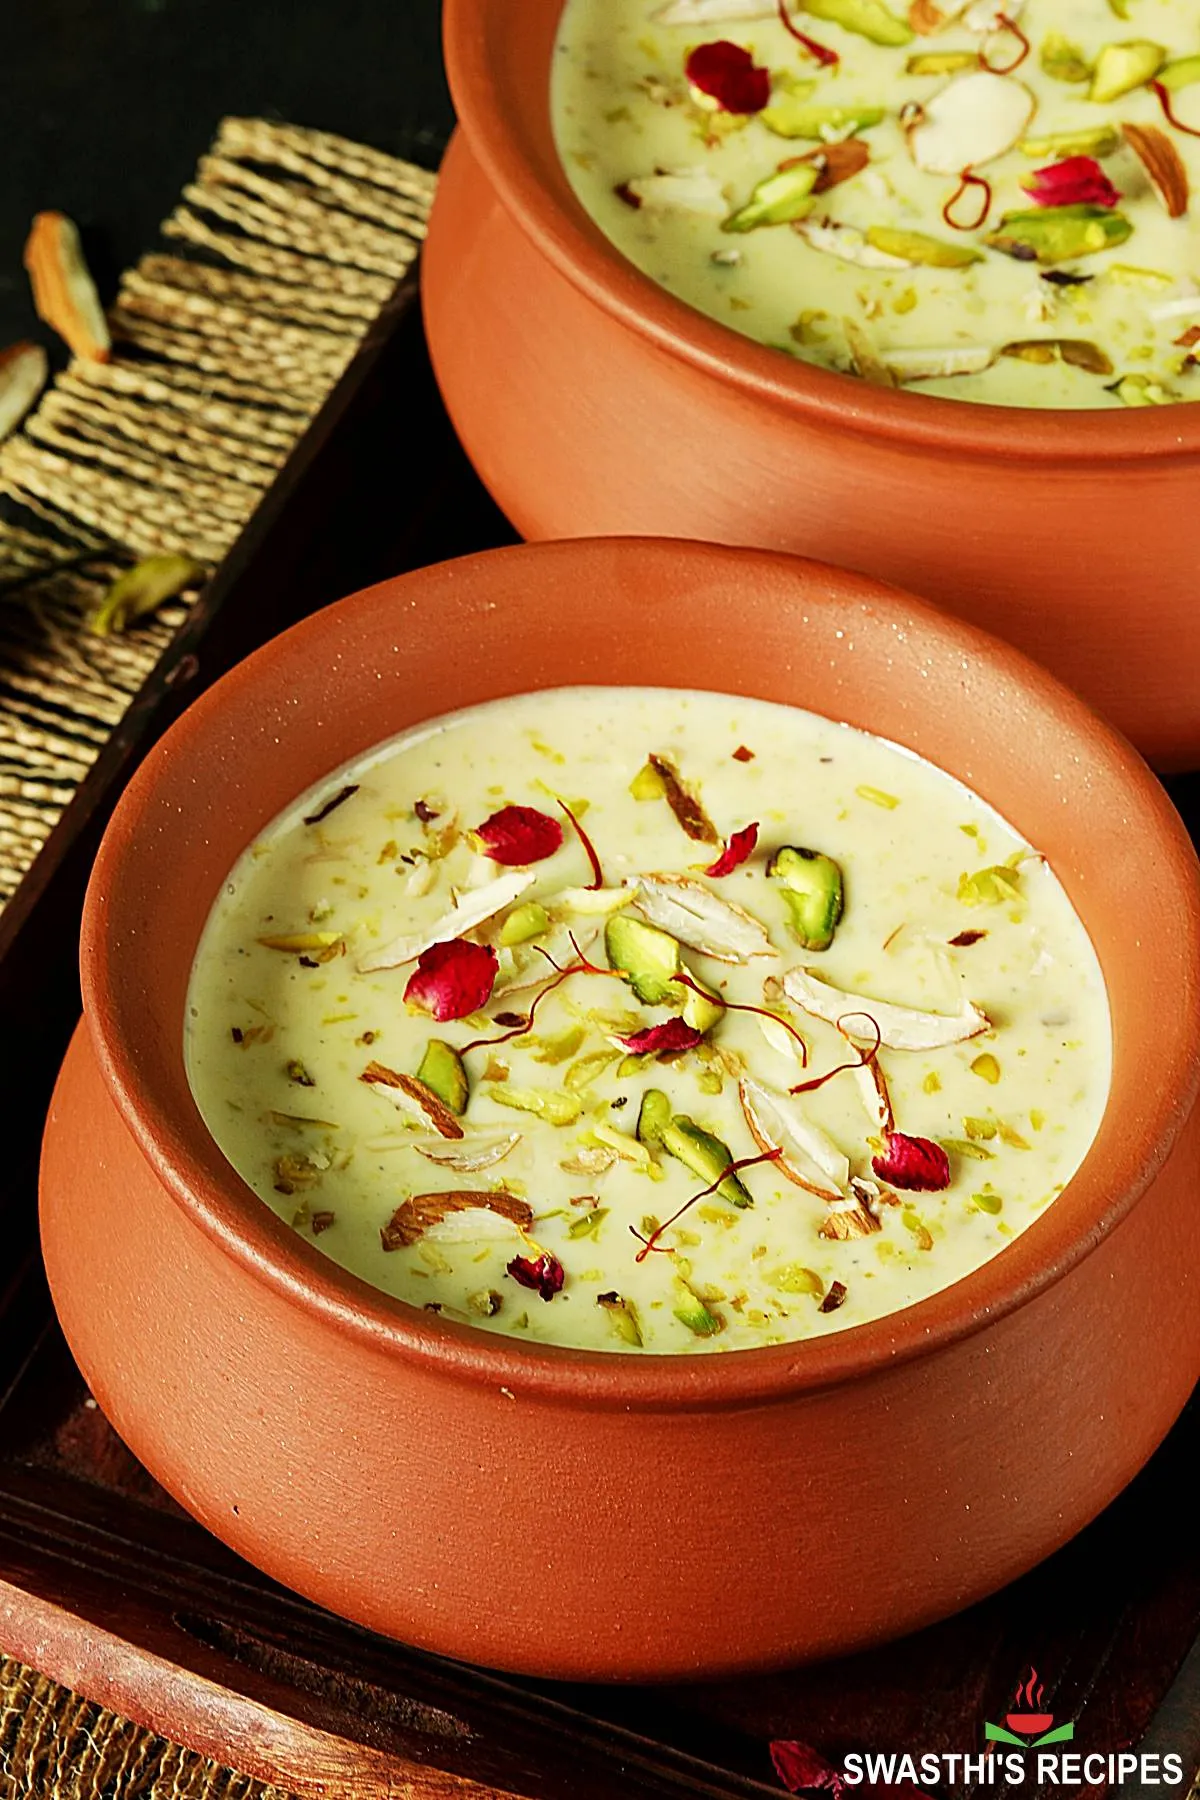 rabri also known as rabdi served in a clay pot